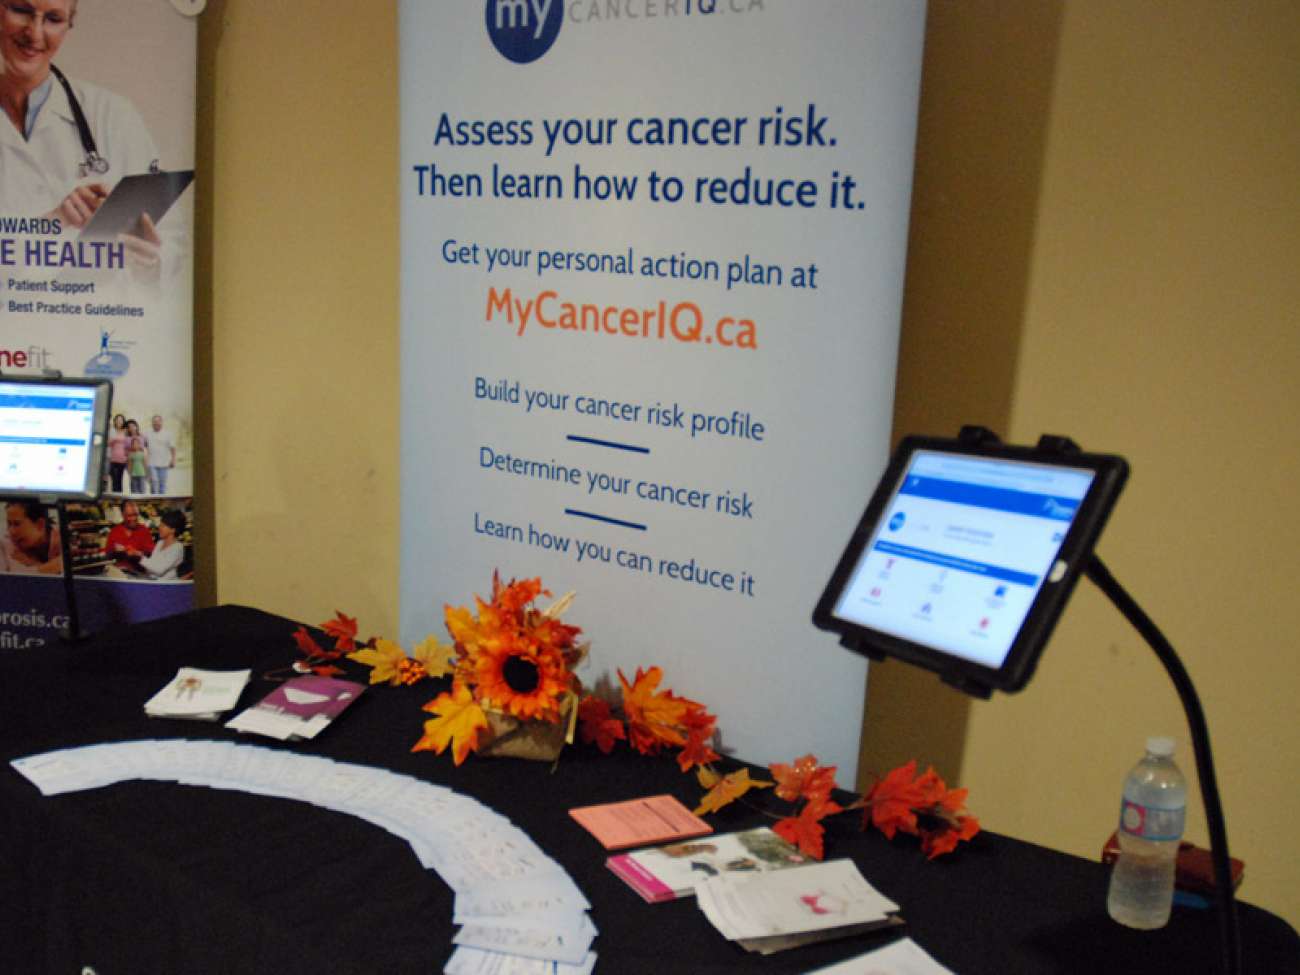 Cancer Care Ontario's MyCancerIQ display was among more than a dozen health education and research displays at the meeting